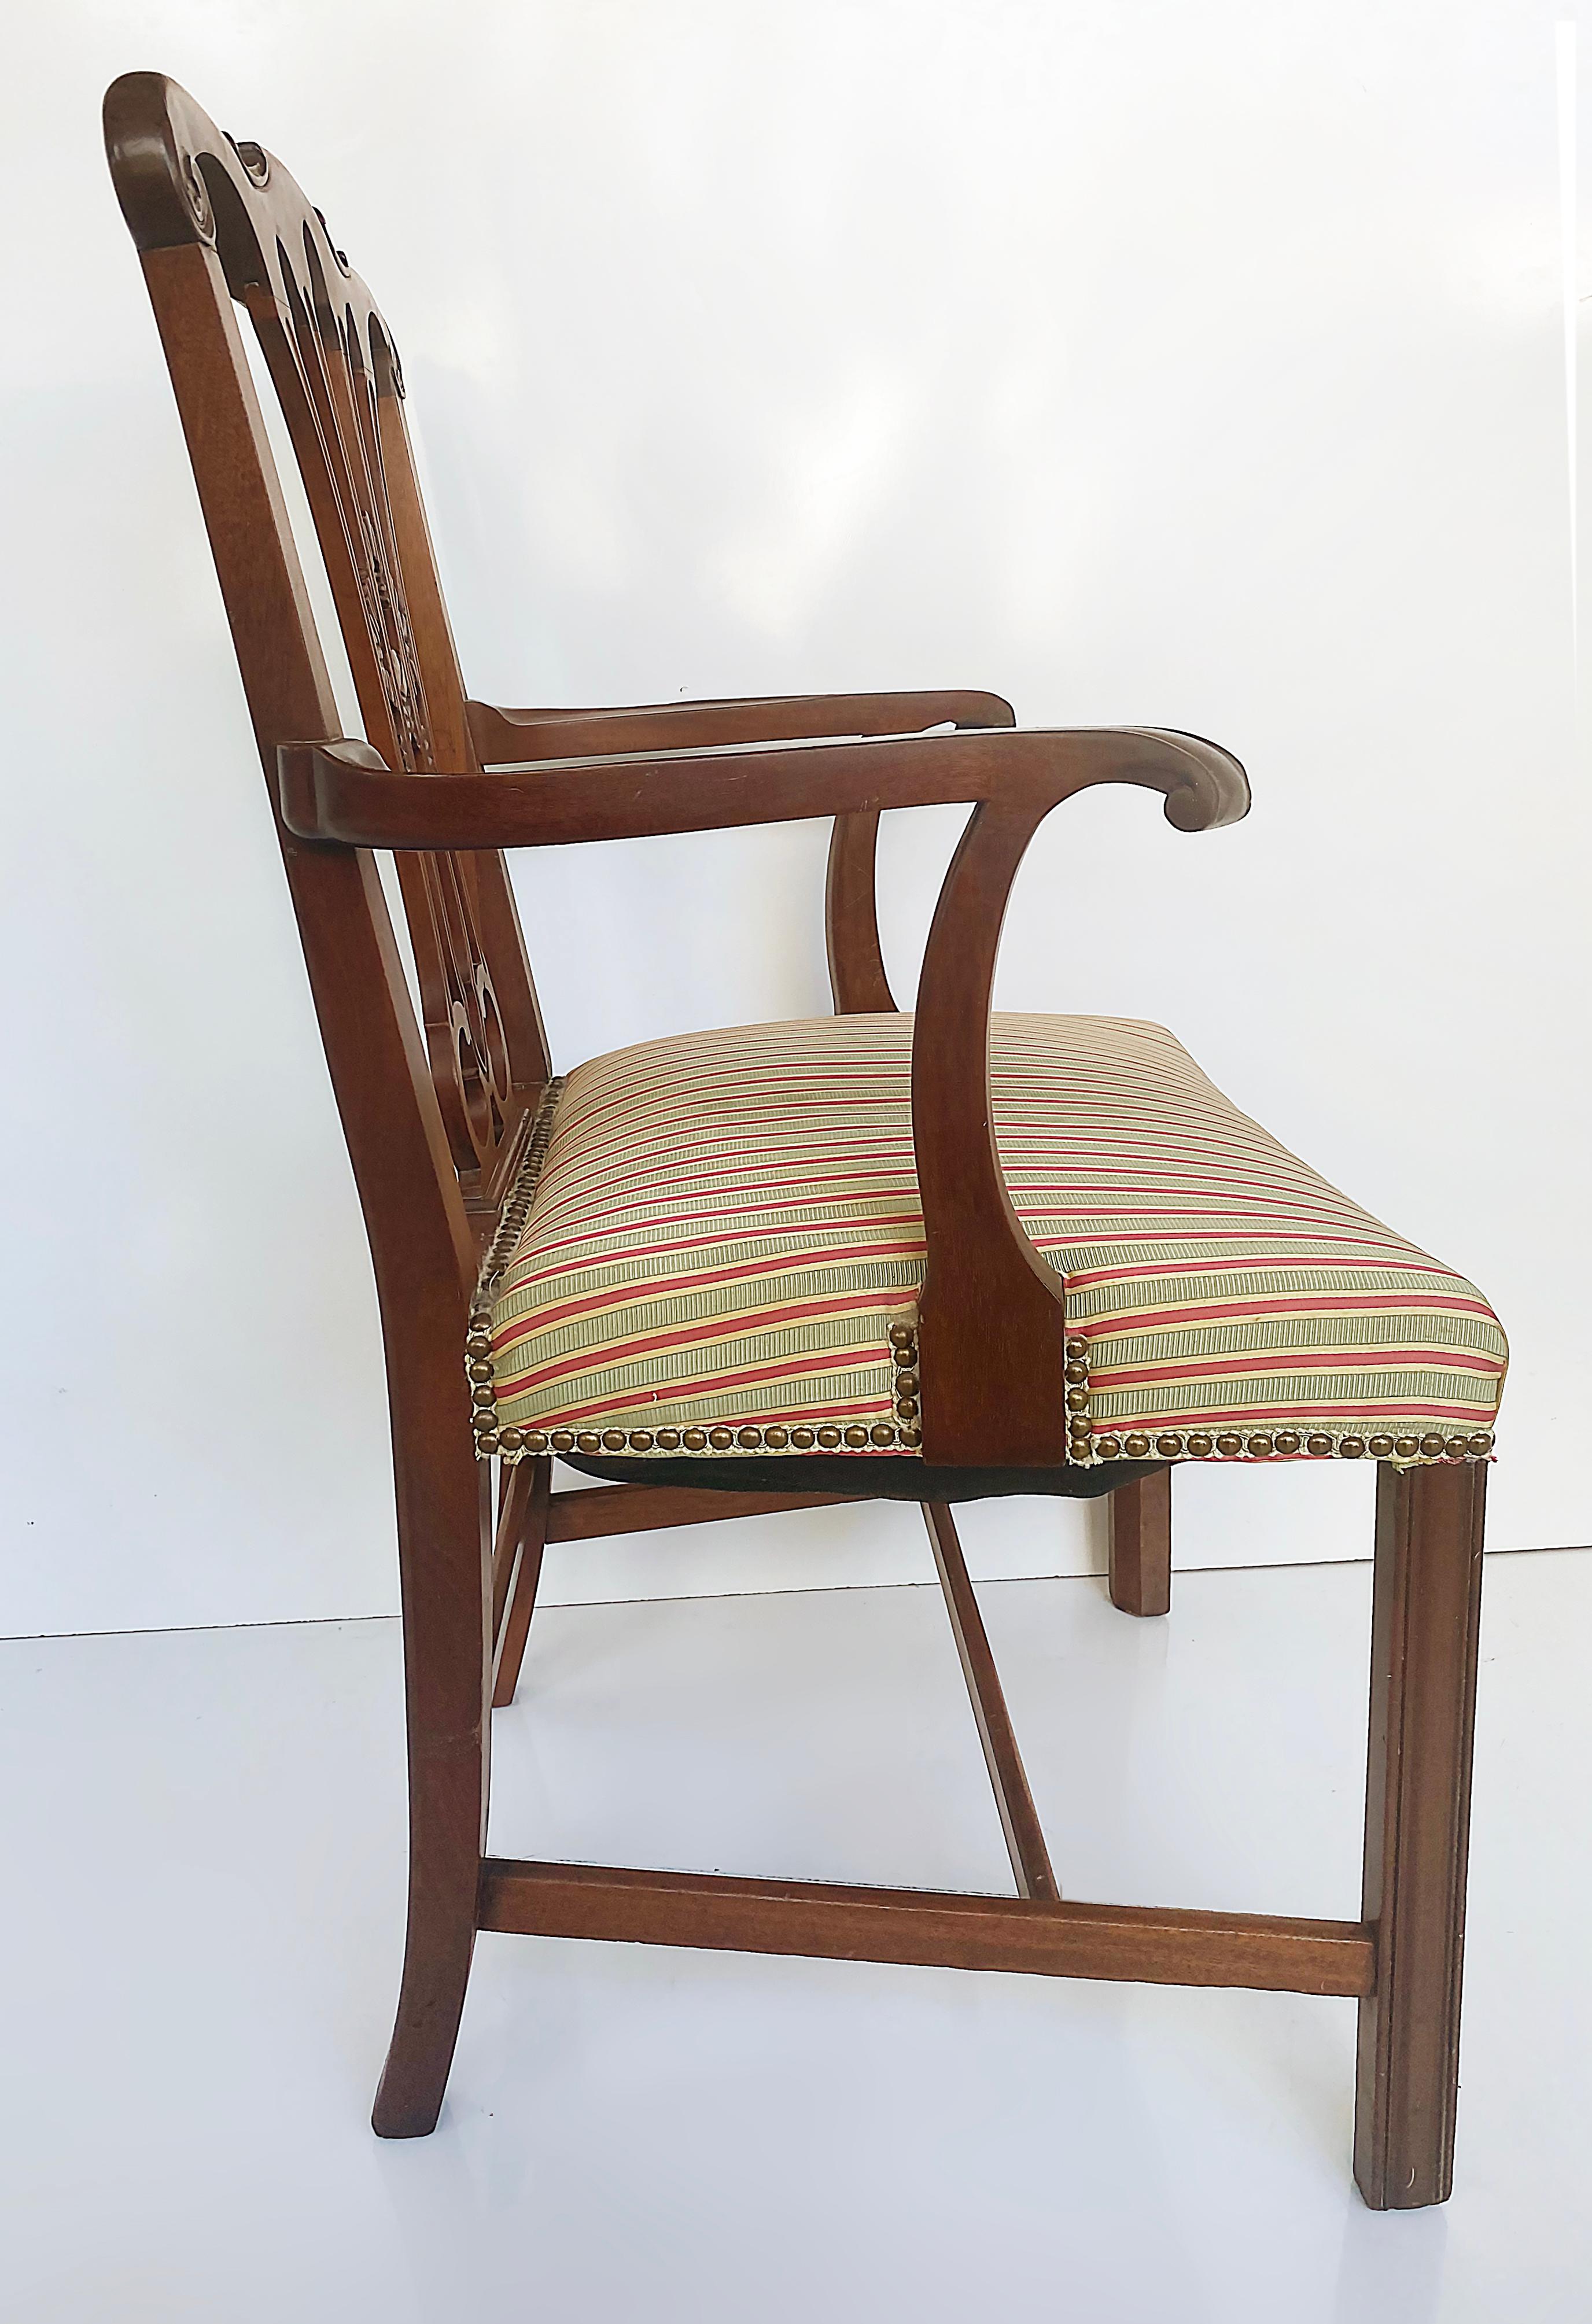 American Chippendale Style Mahogany Slat Back Armchair with Upholstered Seat Cushion For Sale